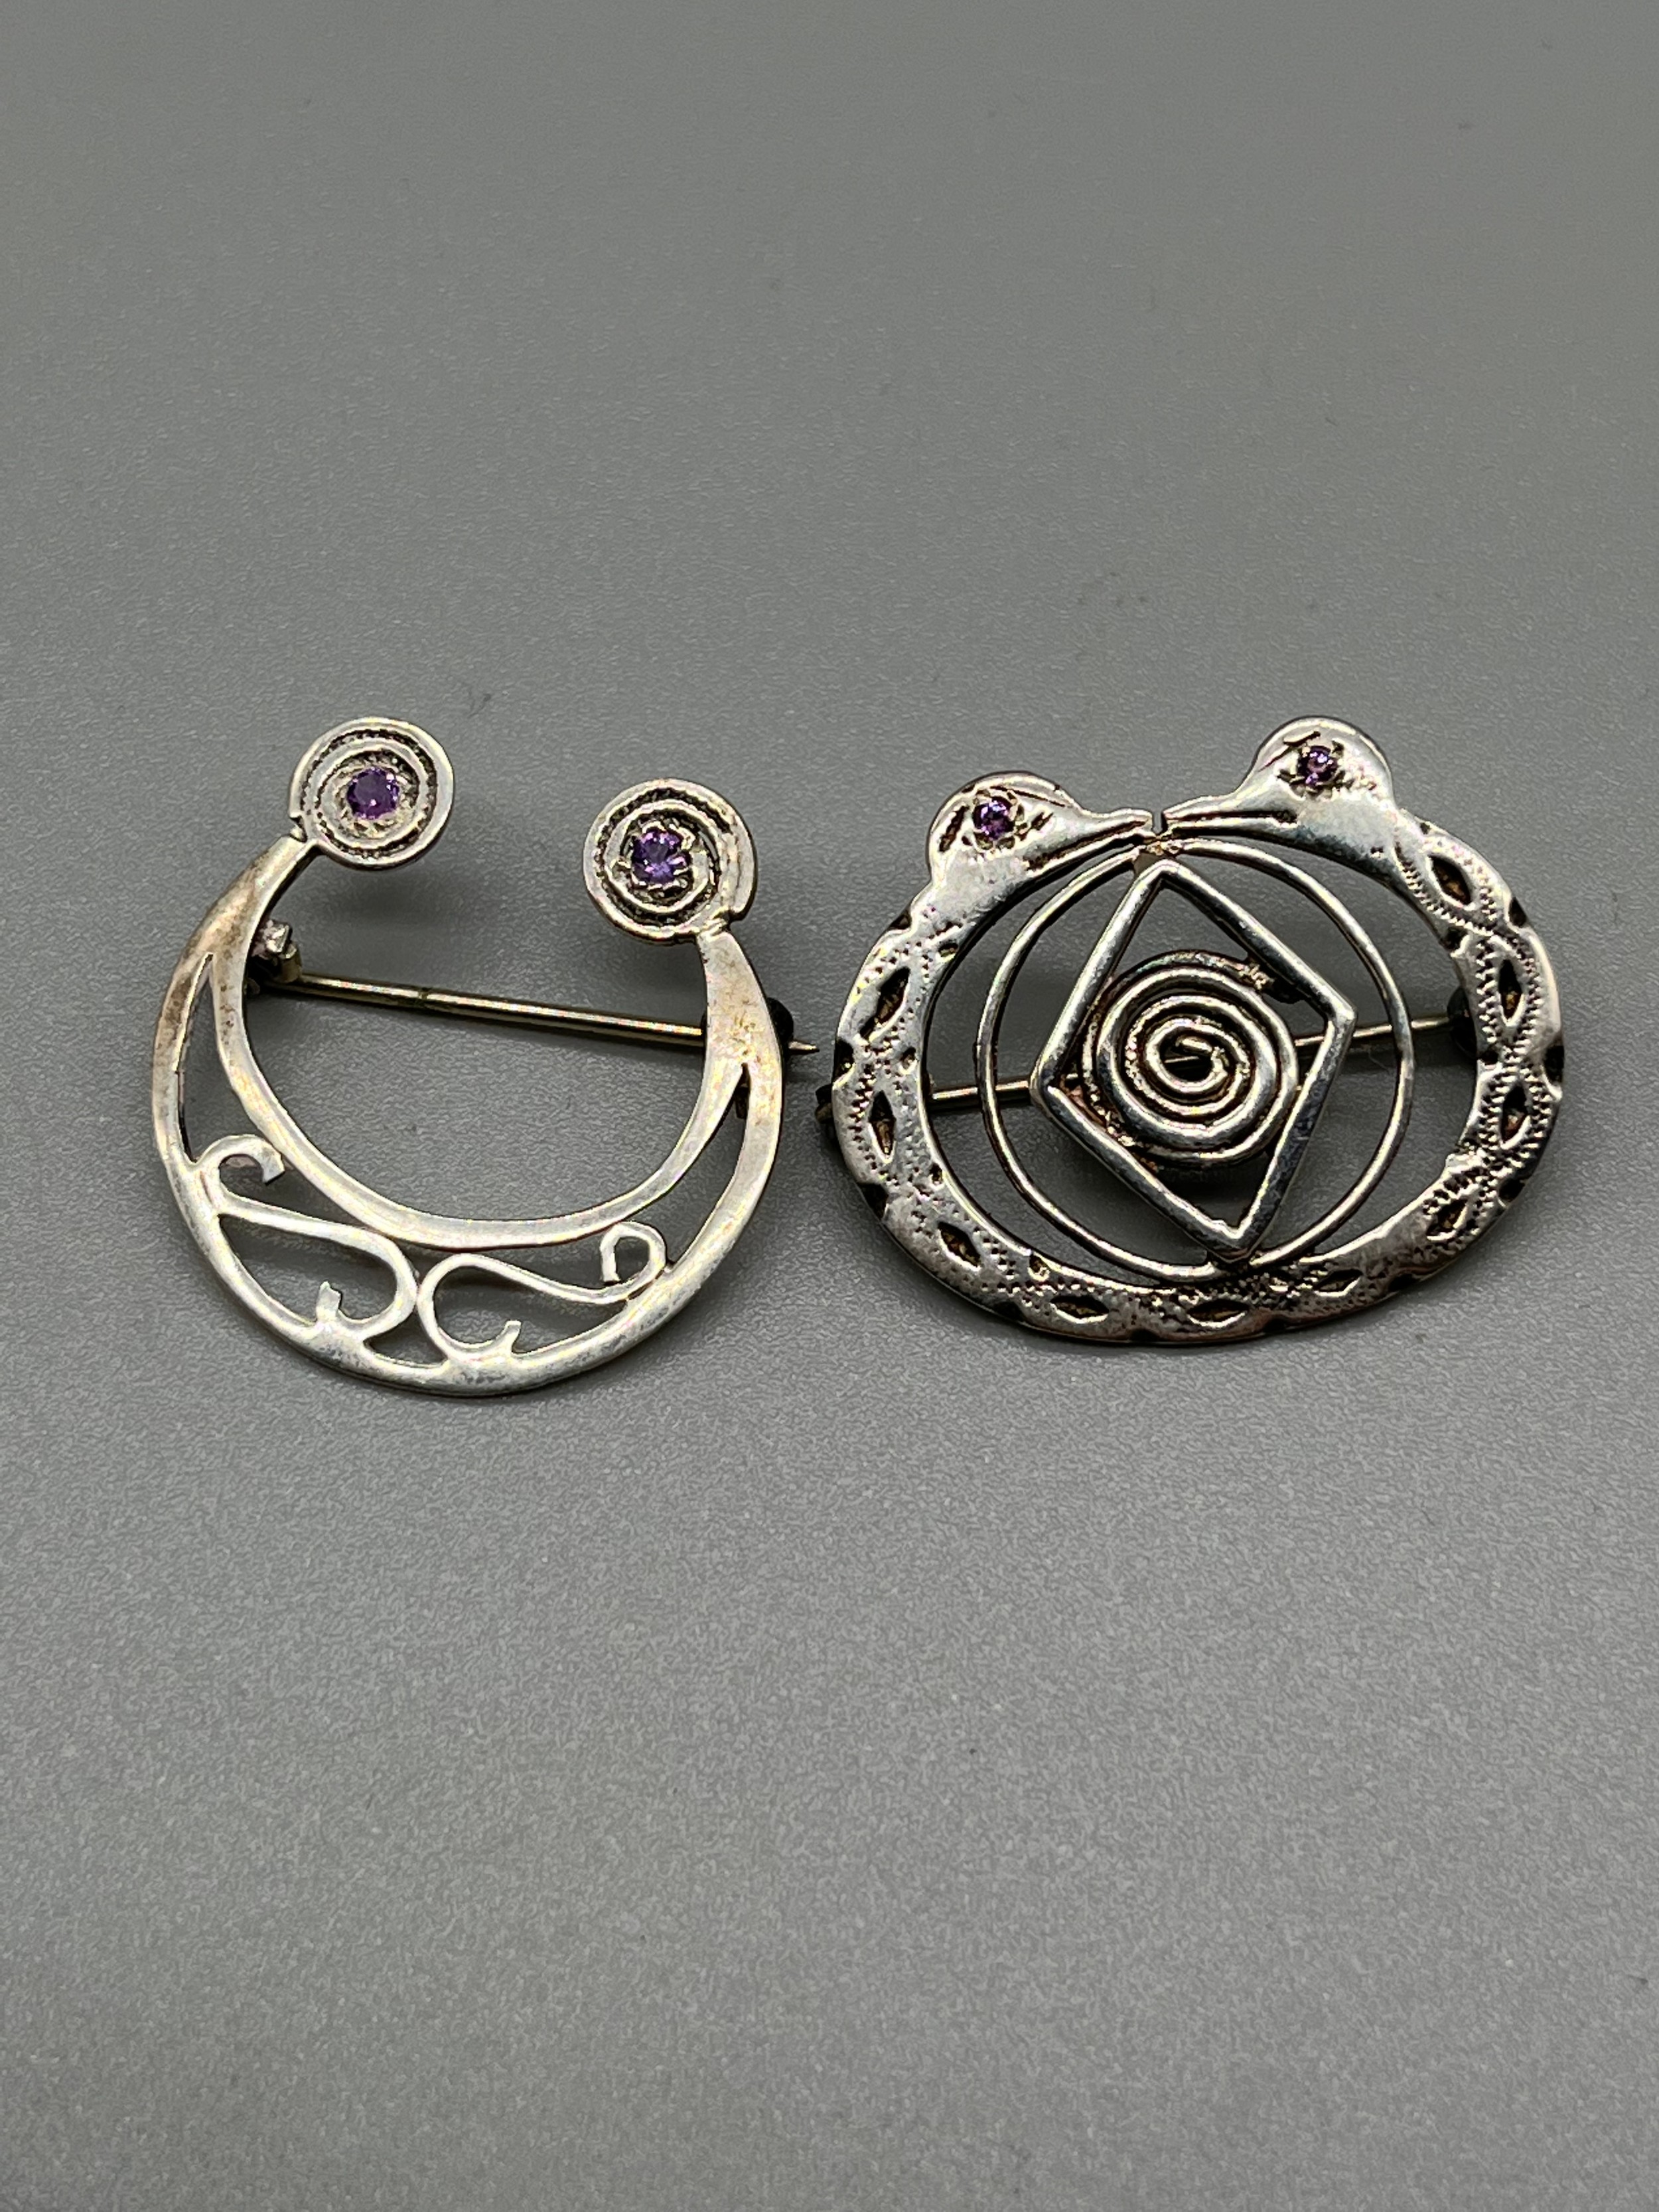 A Lot of two Irish Sterling silver clan/ plaid brooches. Both fitted with amethyst style stones.